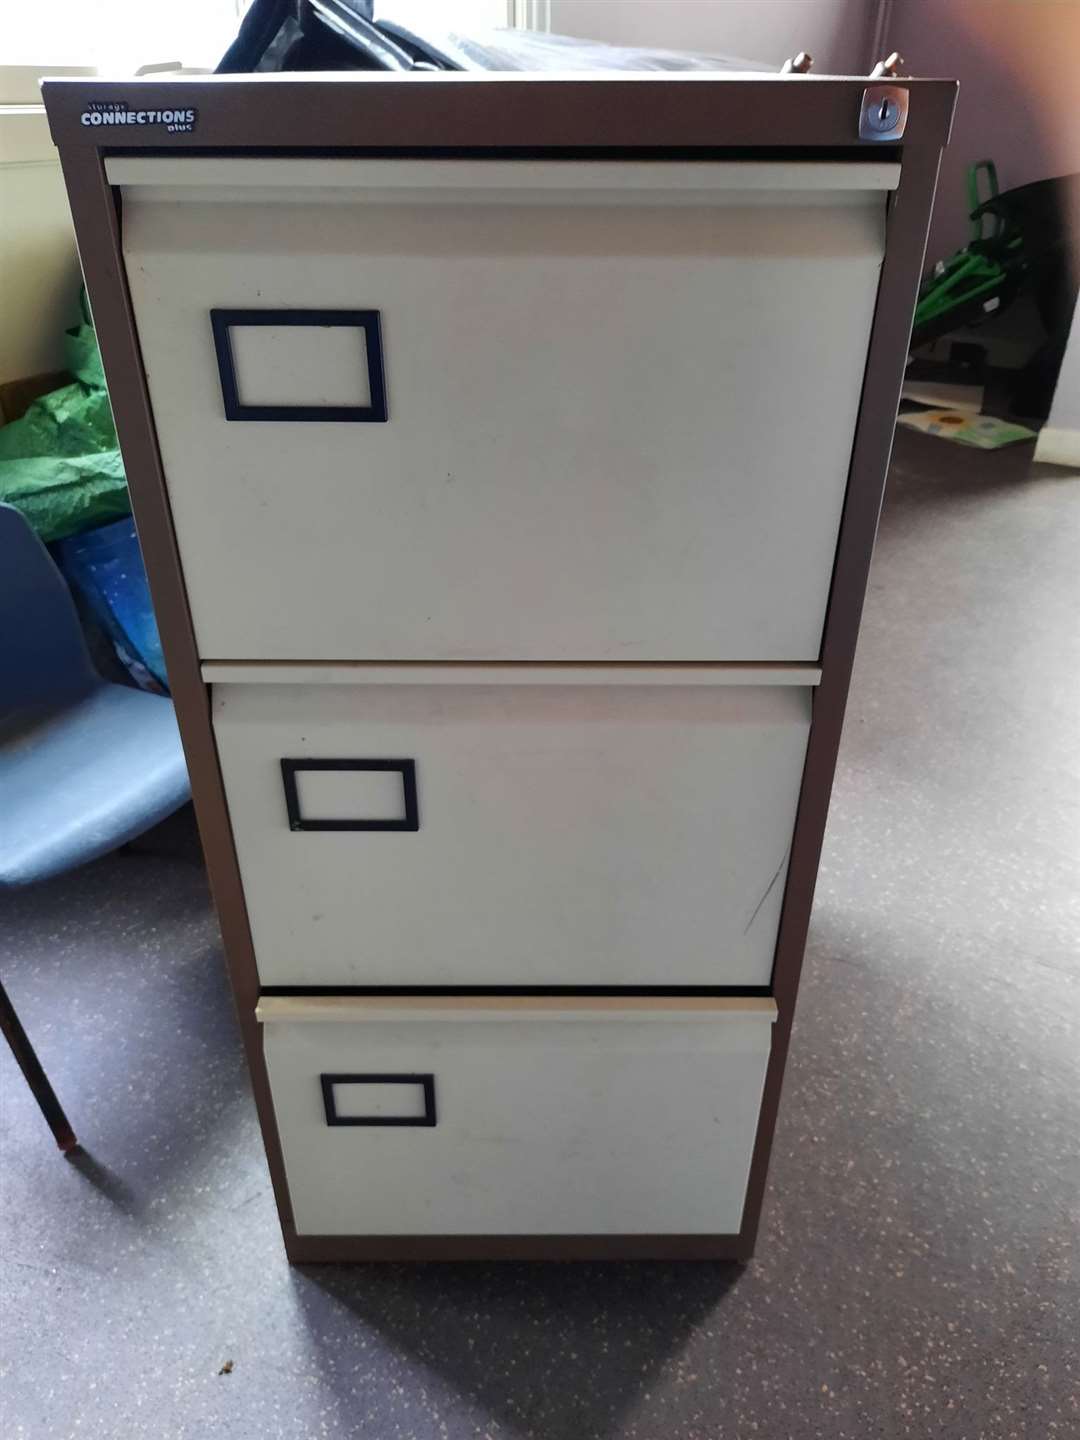 A filing cabinet is amongst the items no longer needed.